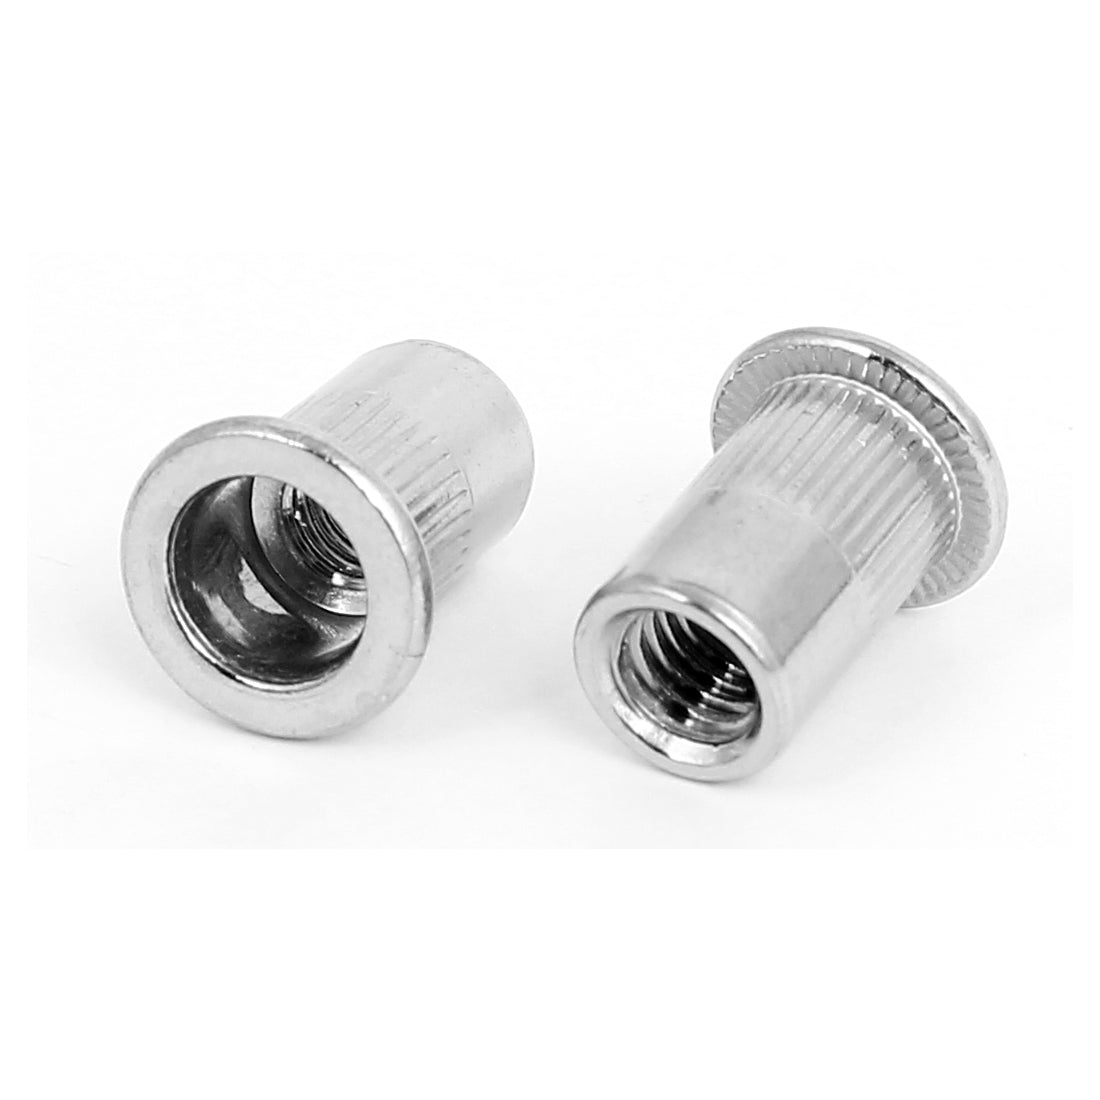 Uxcell Uxcell M5 Thread 304 Stainless Steel Rivet Nut Insert Dadi 30pcs